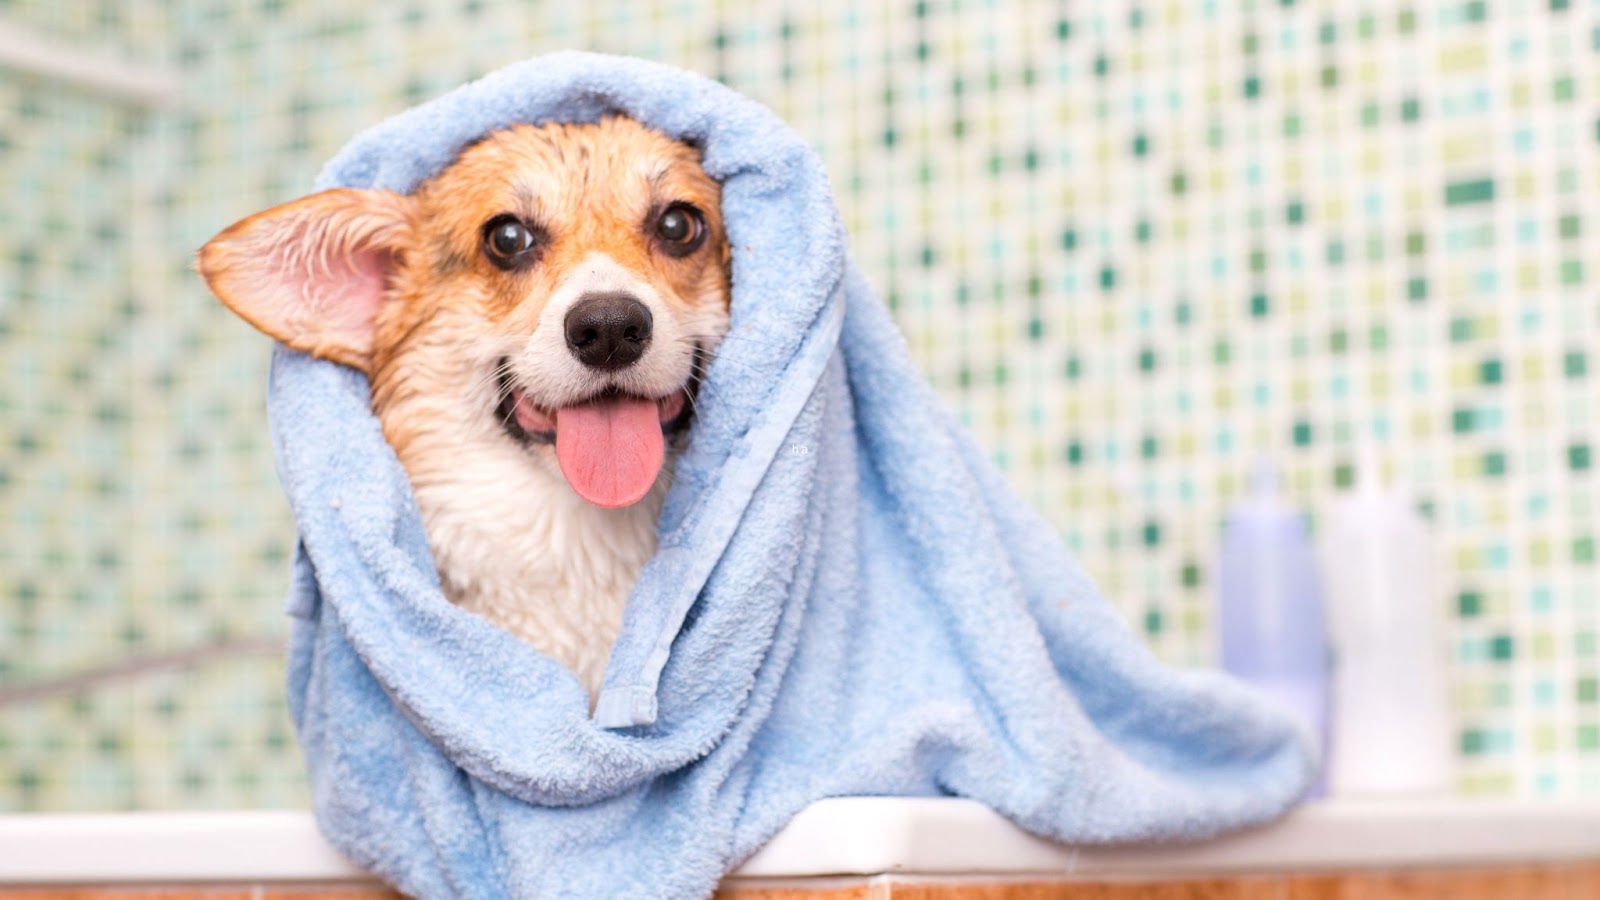 Corgi dog being dried off with towel after bath